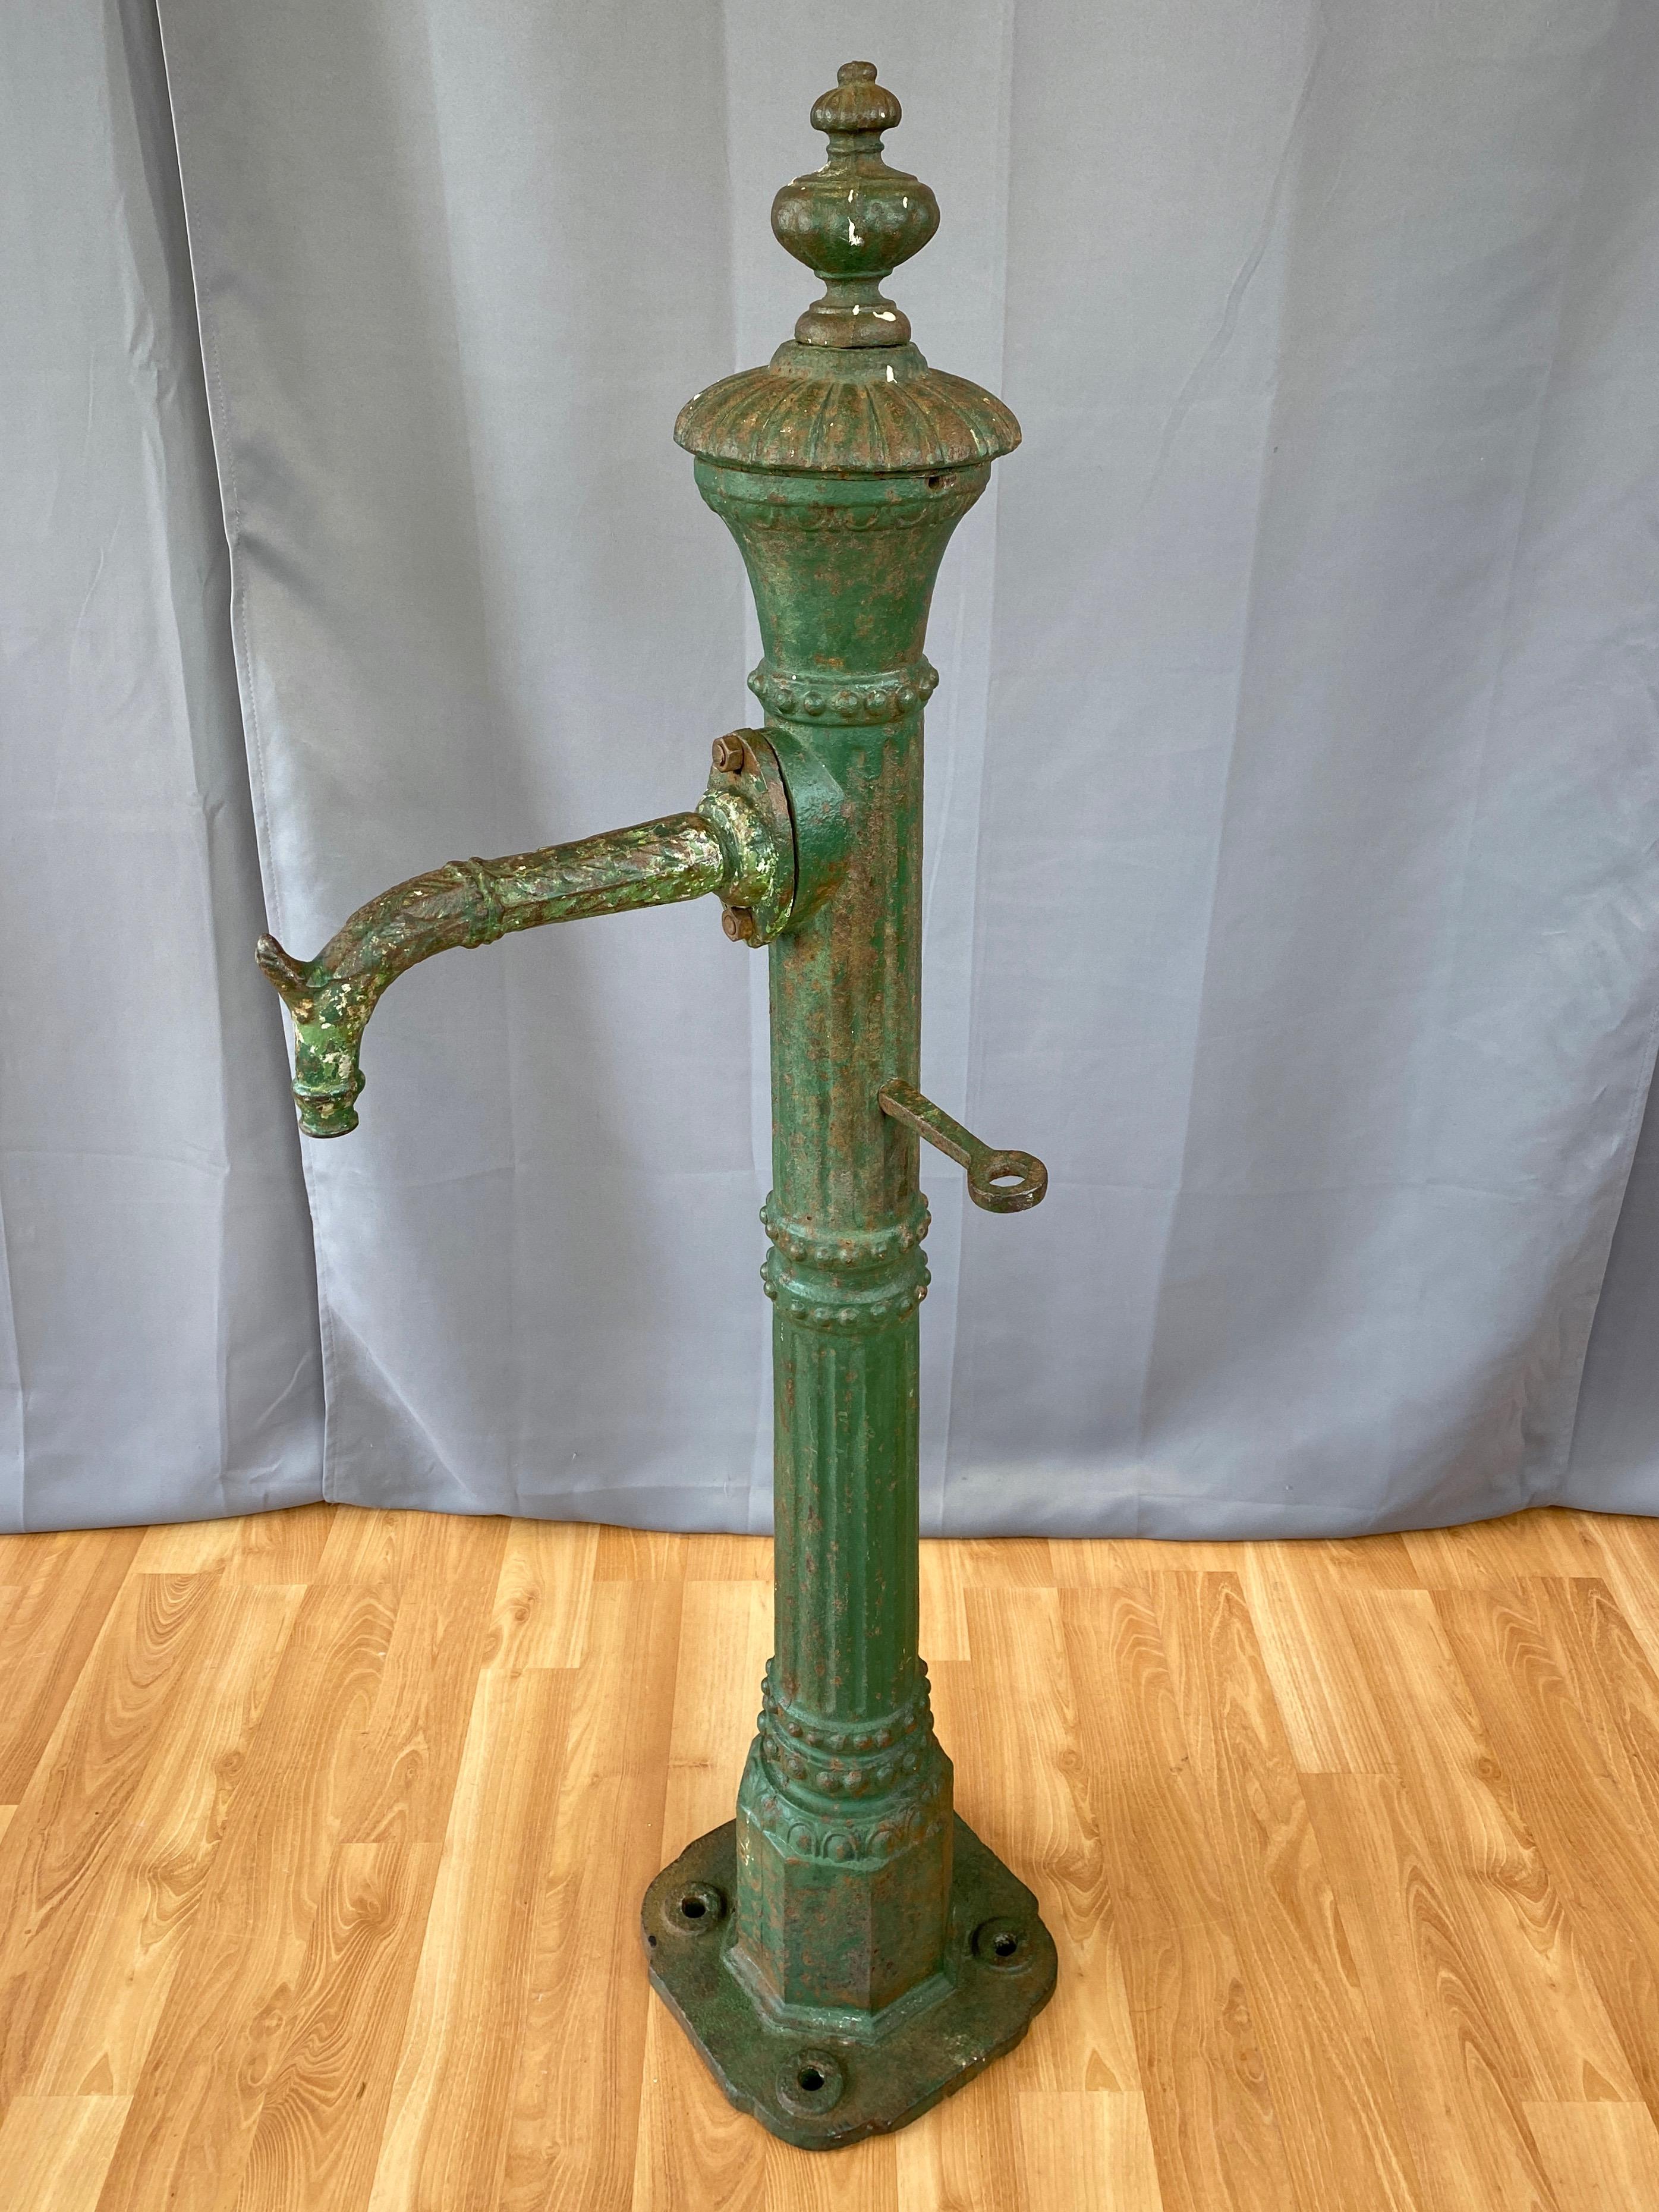 American Antique Tall Green Cast Iron Water Fountain from San Francisco, c. 1860